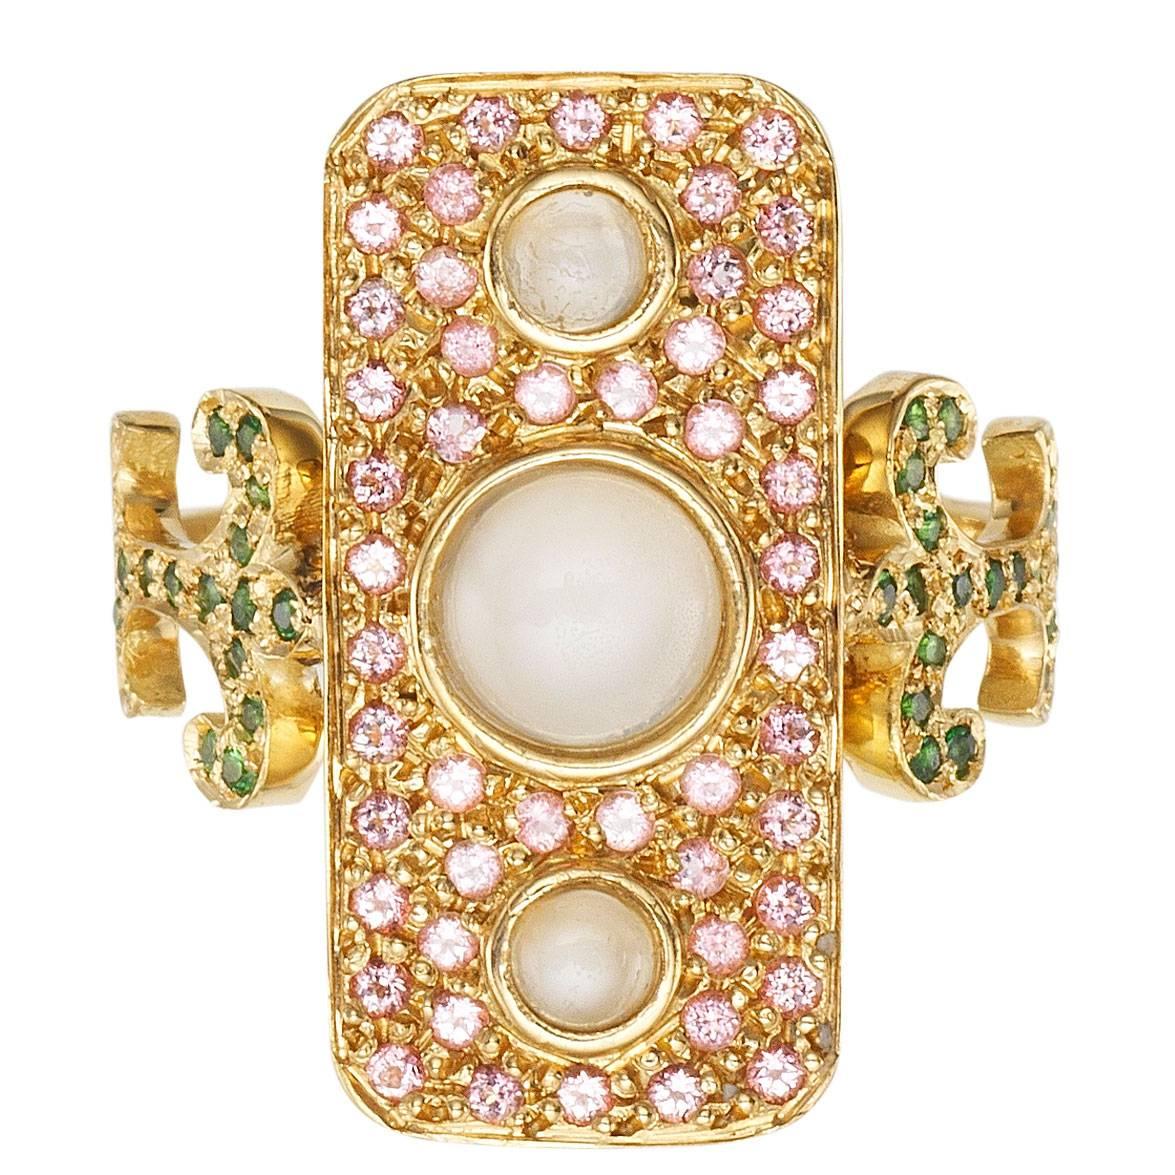 Sabine Getty Navona Ring in Gold set with Moonstone, Pink Topaz and Tsavorite